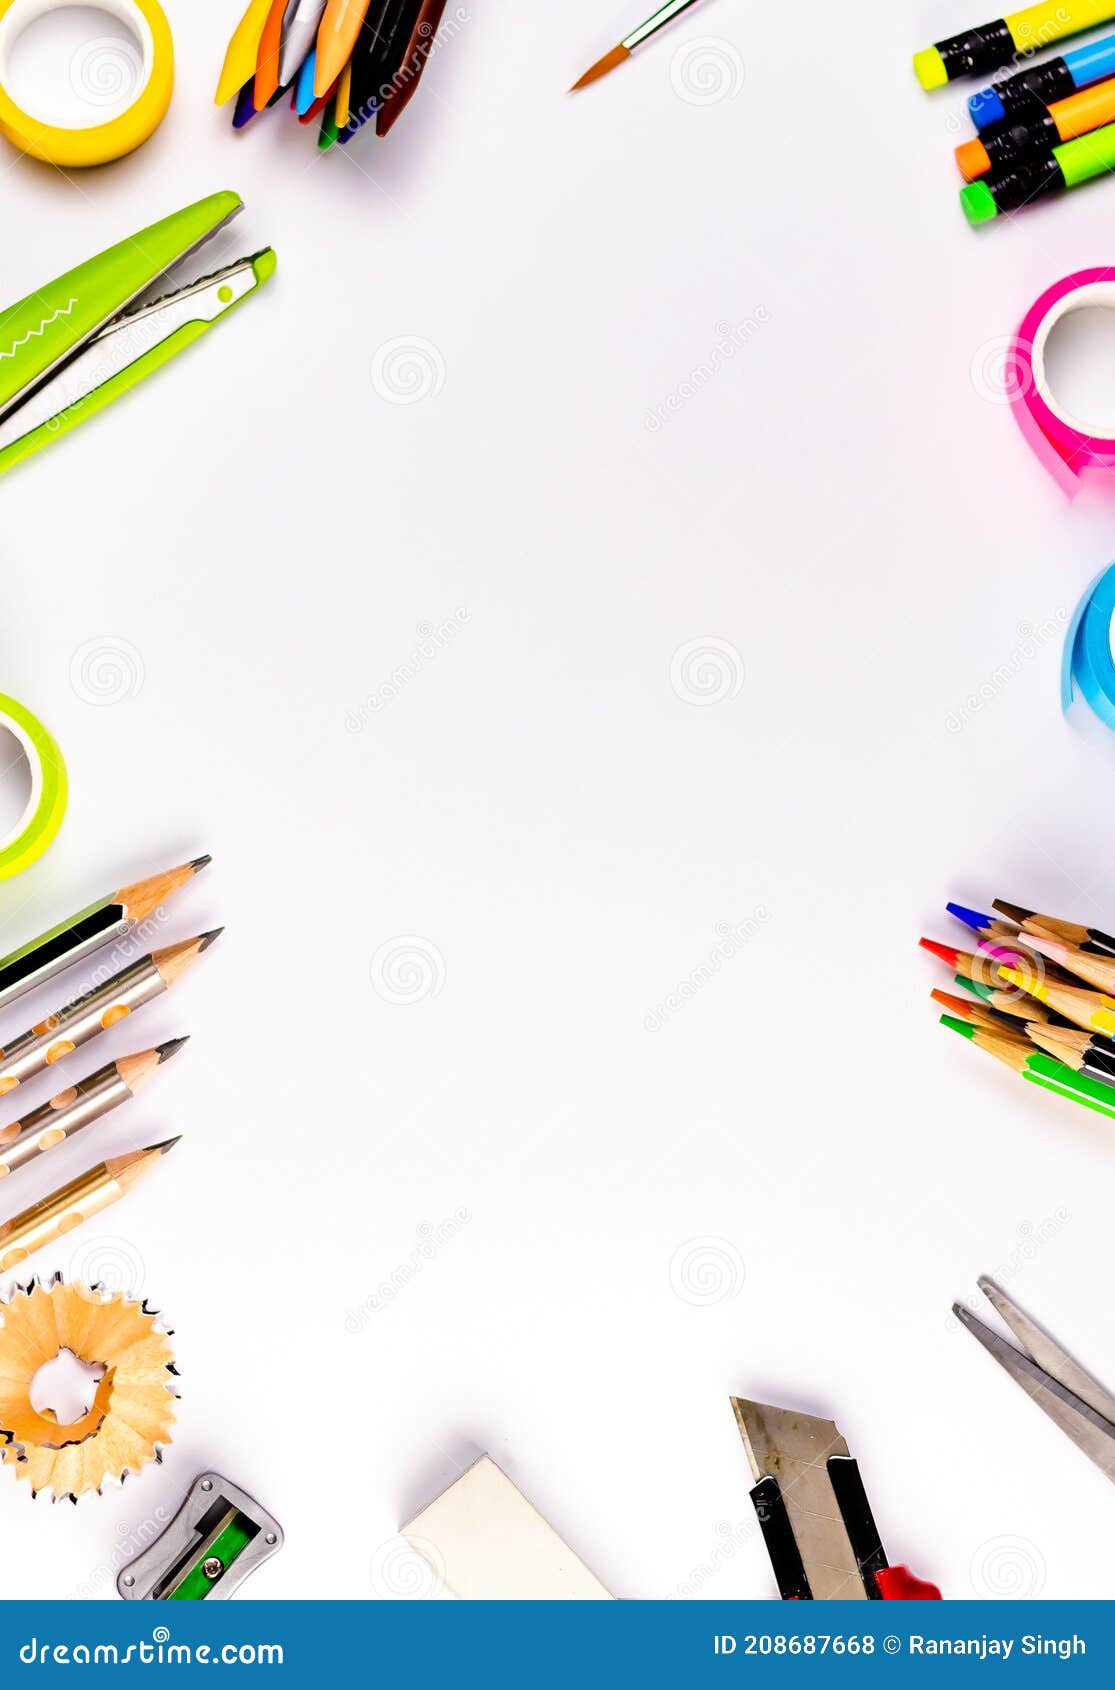 Stationary Goods in Portrait Orientation Shot Over White Background in Art  and Craft Concept Stock Photo - Image of education, craft: 208687668